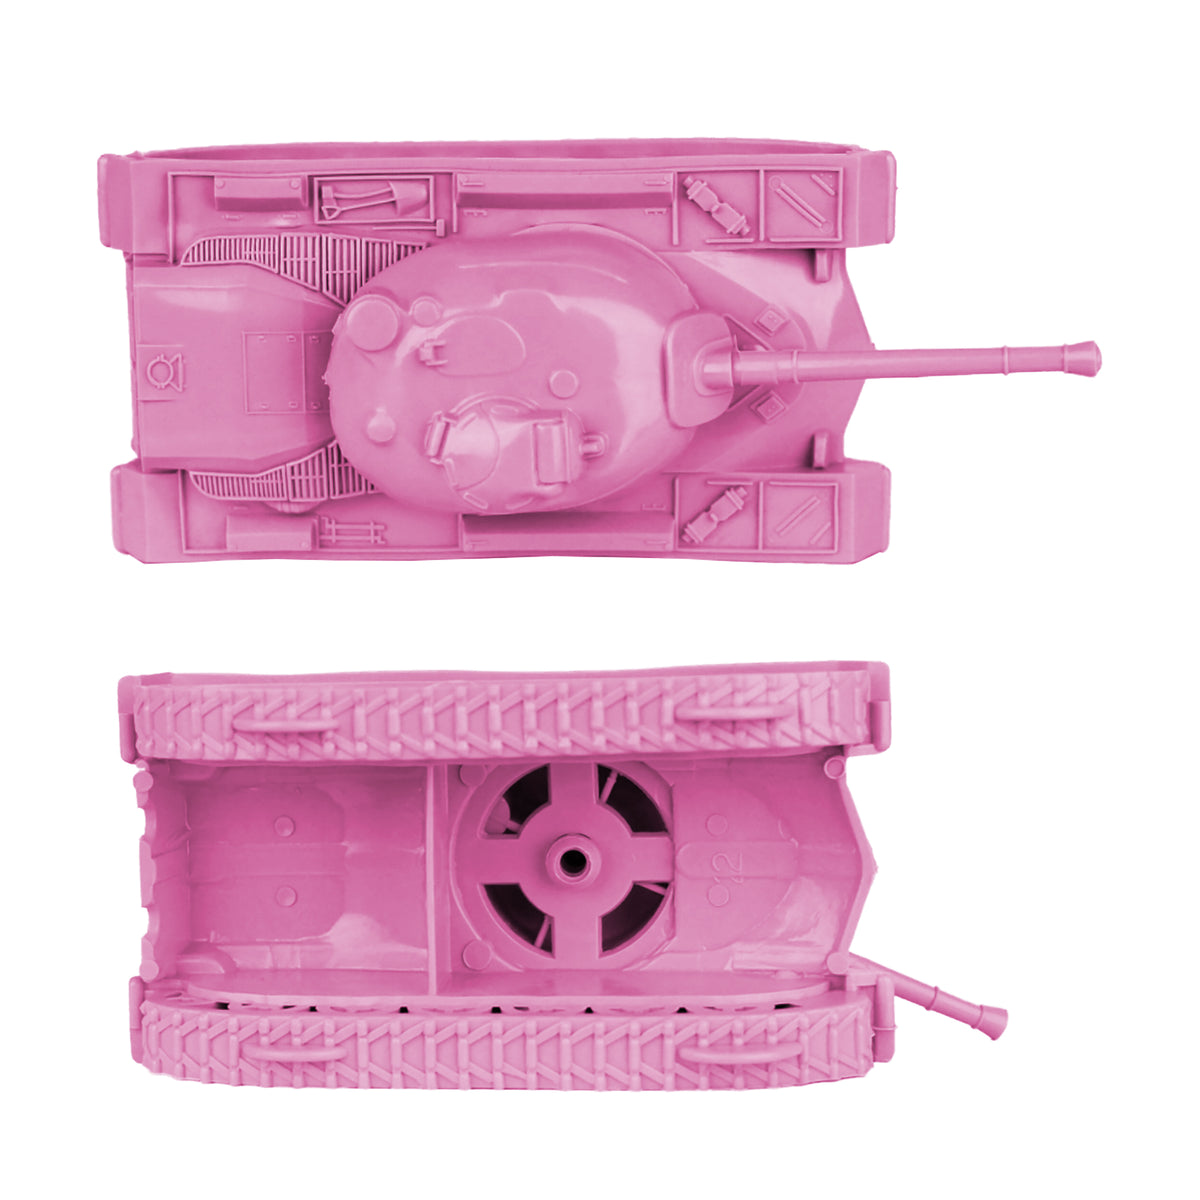 TimMee Toy TANKS for Plastic Army Men Pink WW2 3pc - Made in – BMC